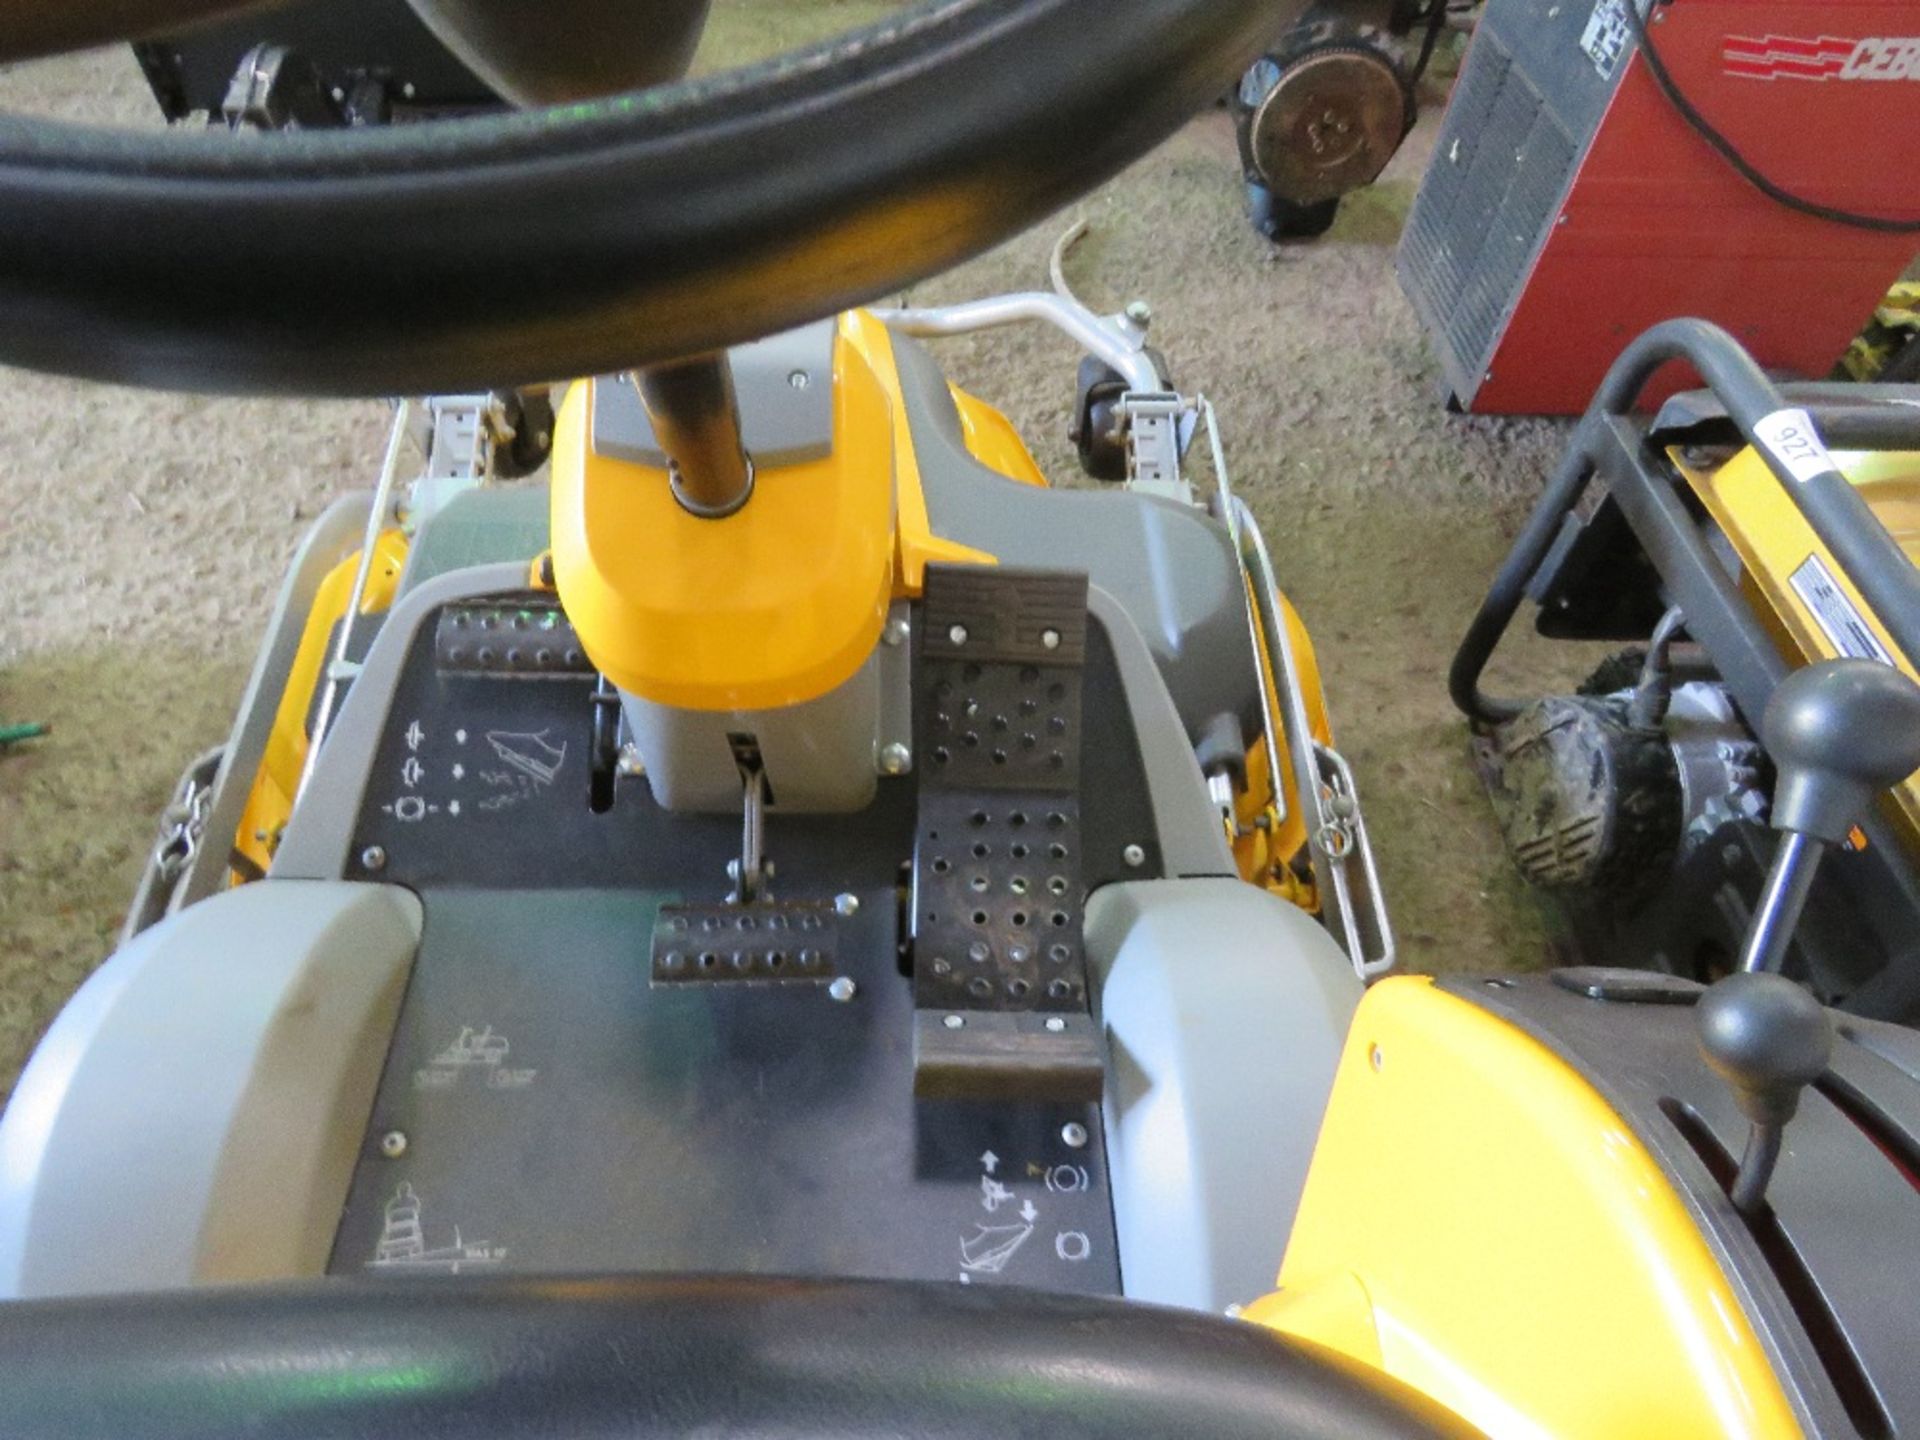 STIGA PARK 520P RIDE ON MOWER WITH COMBI 100 DECK. 273 REC HRS, YEAR 2015. WHEN TESTED WAS SEEN TO D - Image 7 of 11